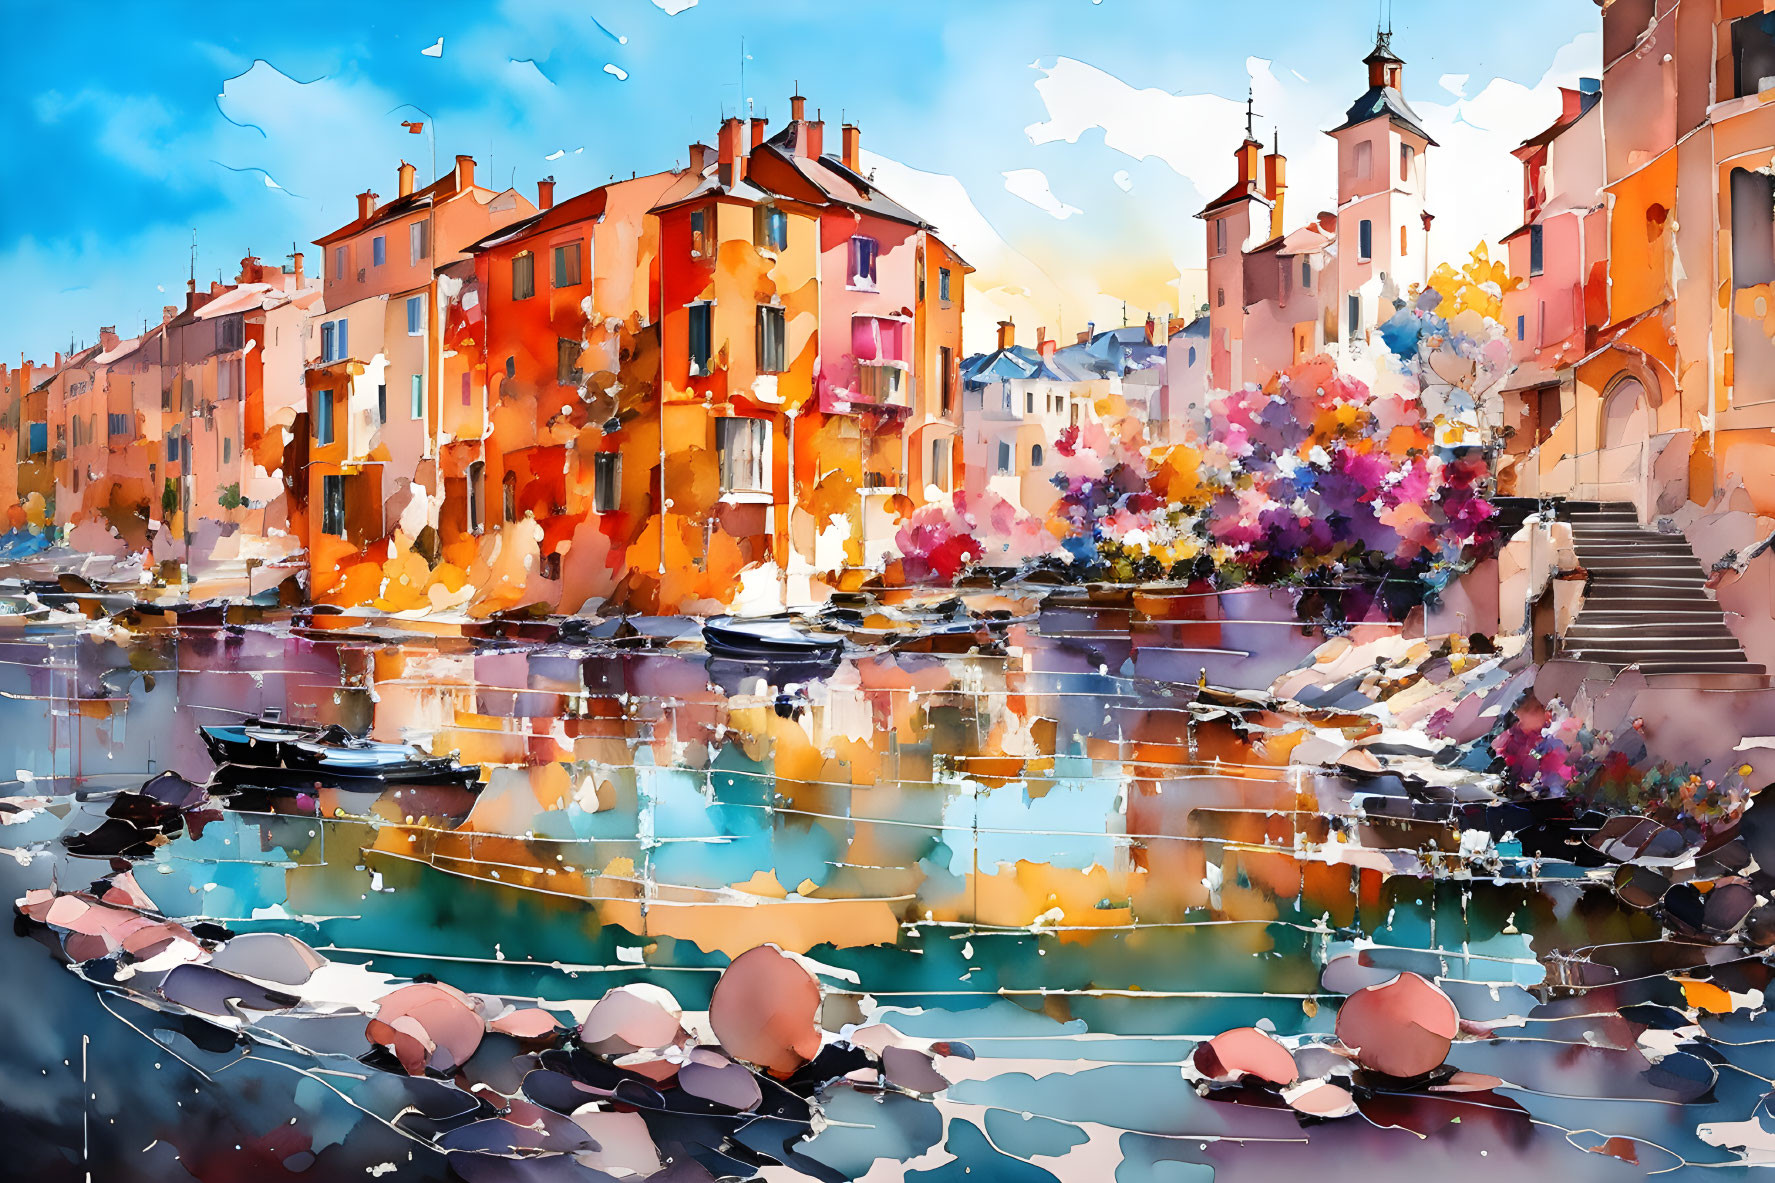 Vibrant Watercolor Painting: Canal Scene with Reflections, Boats, and Bright Buildings